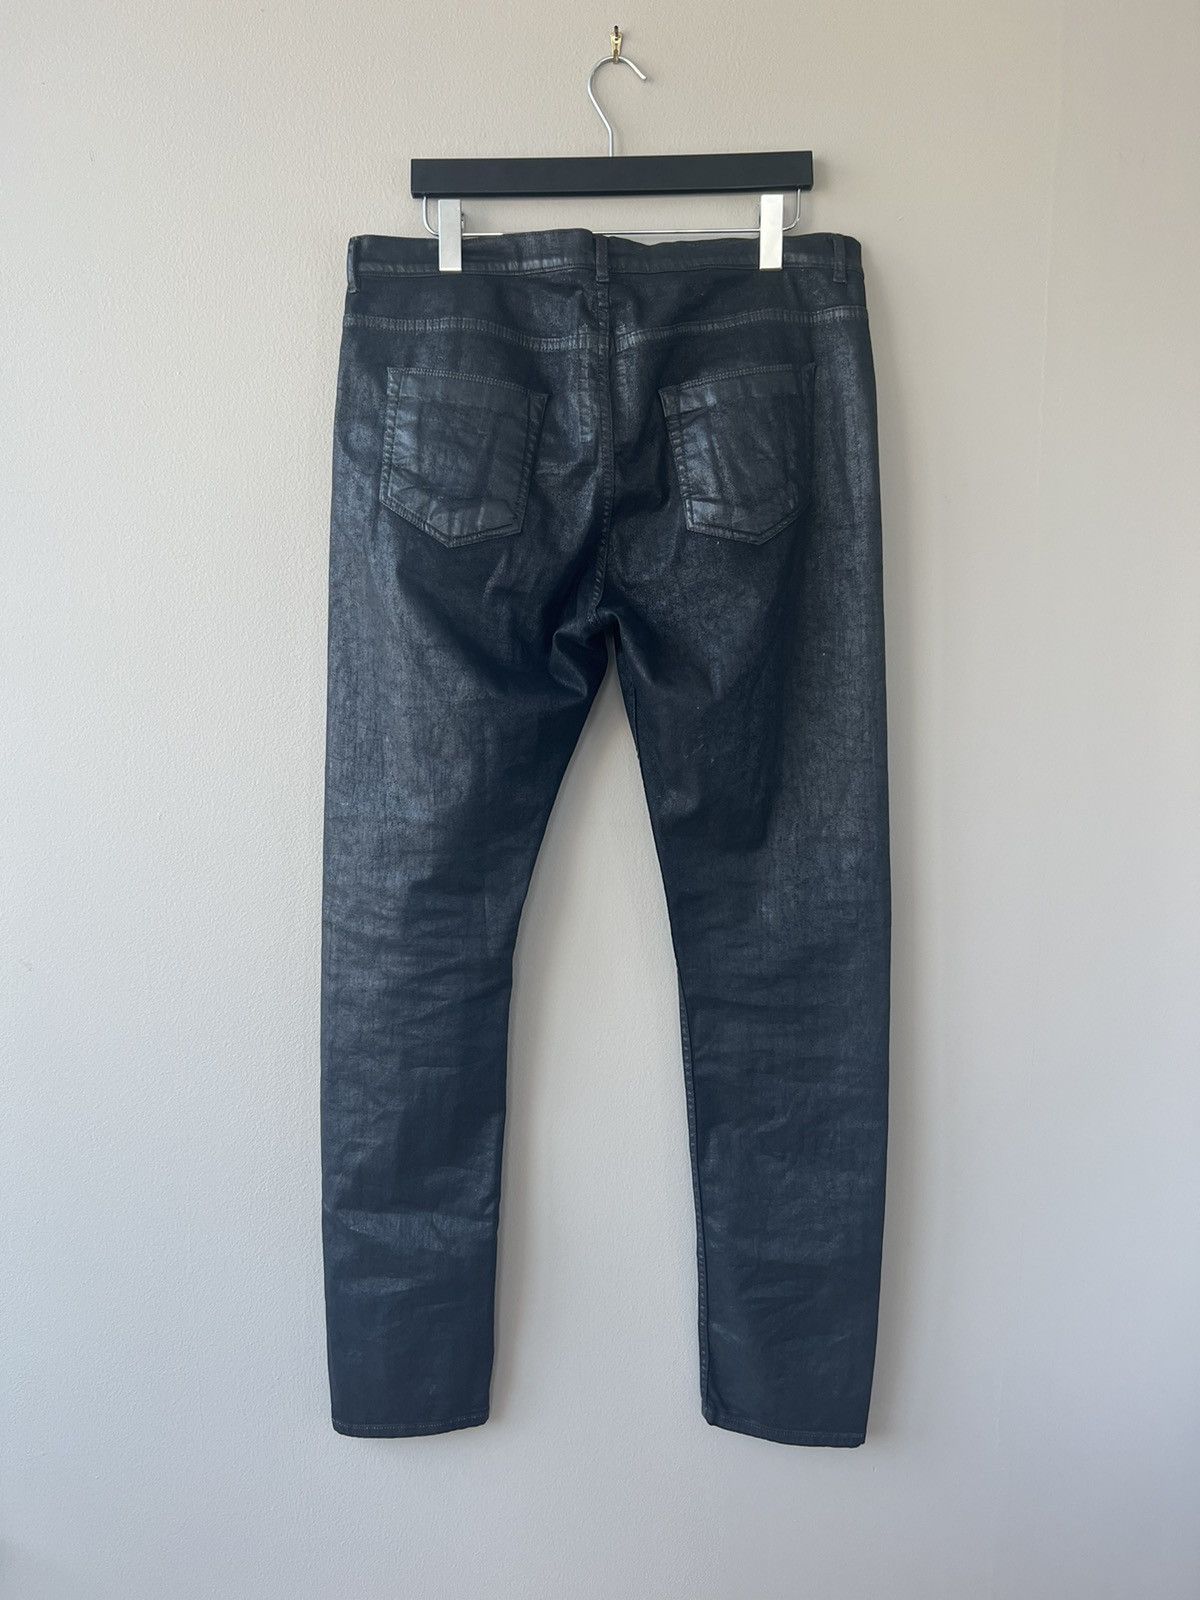 Black Waxed Torrence Cut Jeans - 7